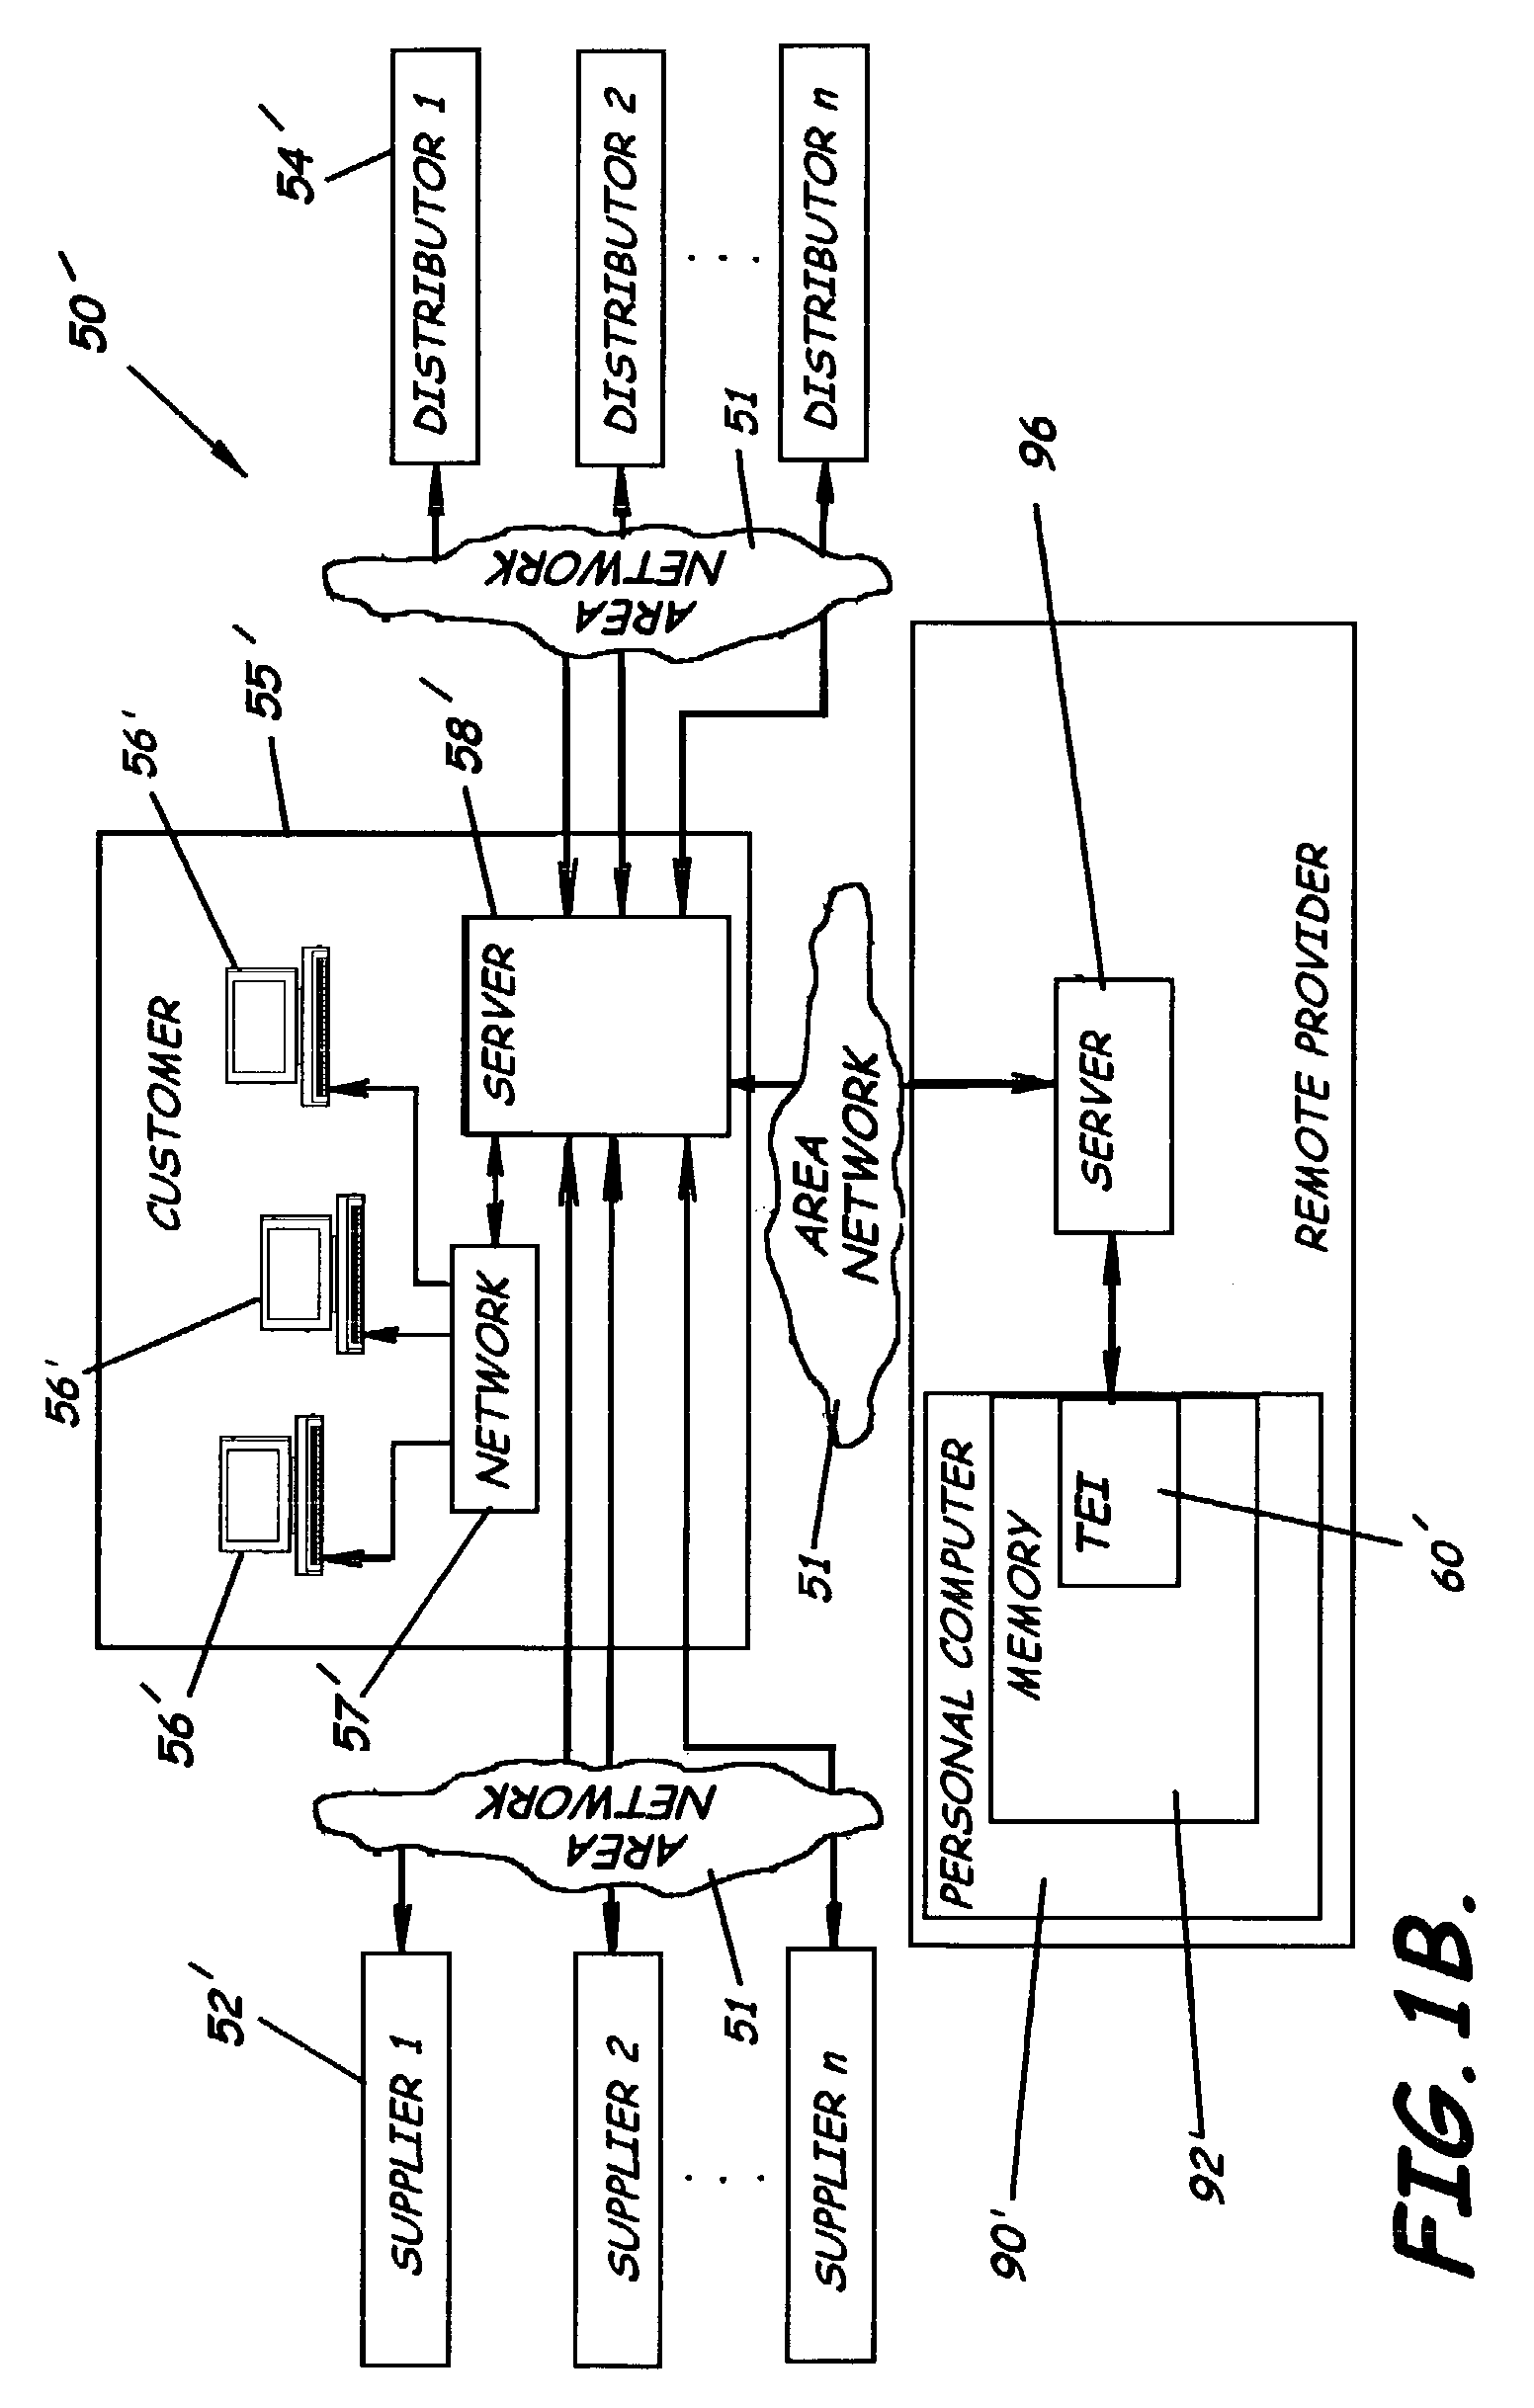 Software, method and system for data connectivity and integration having transformation and exchange infrastructure